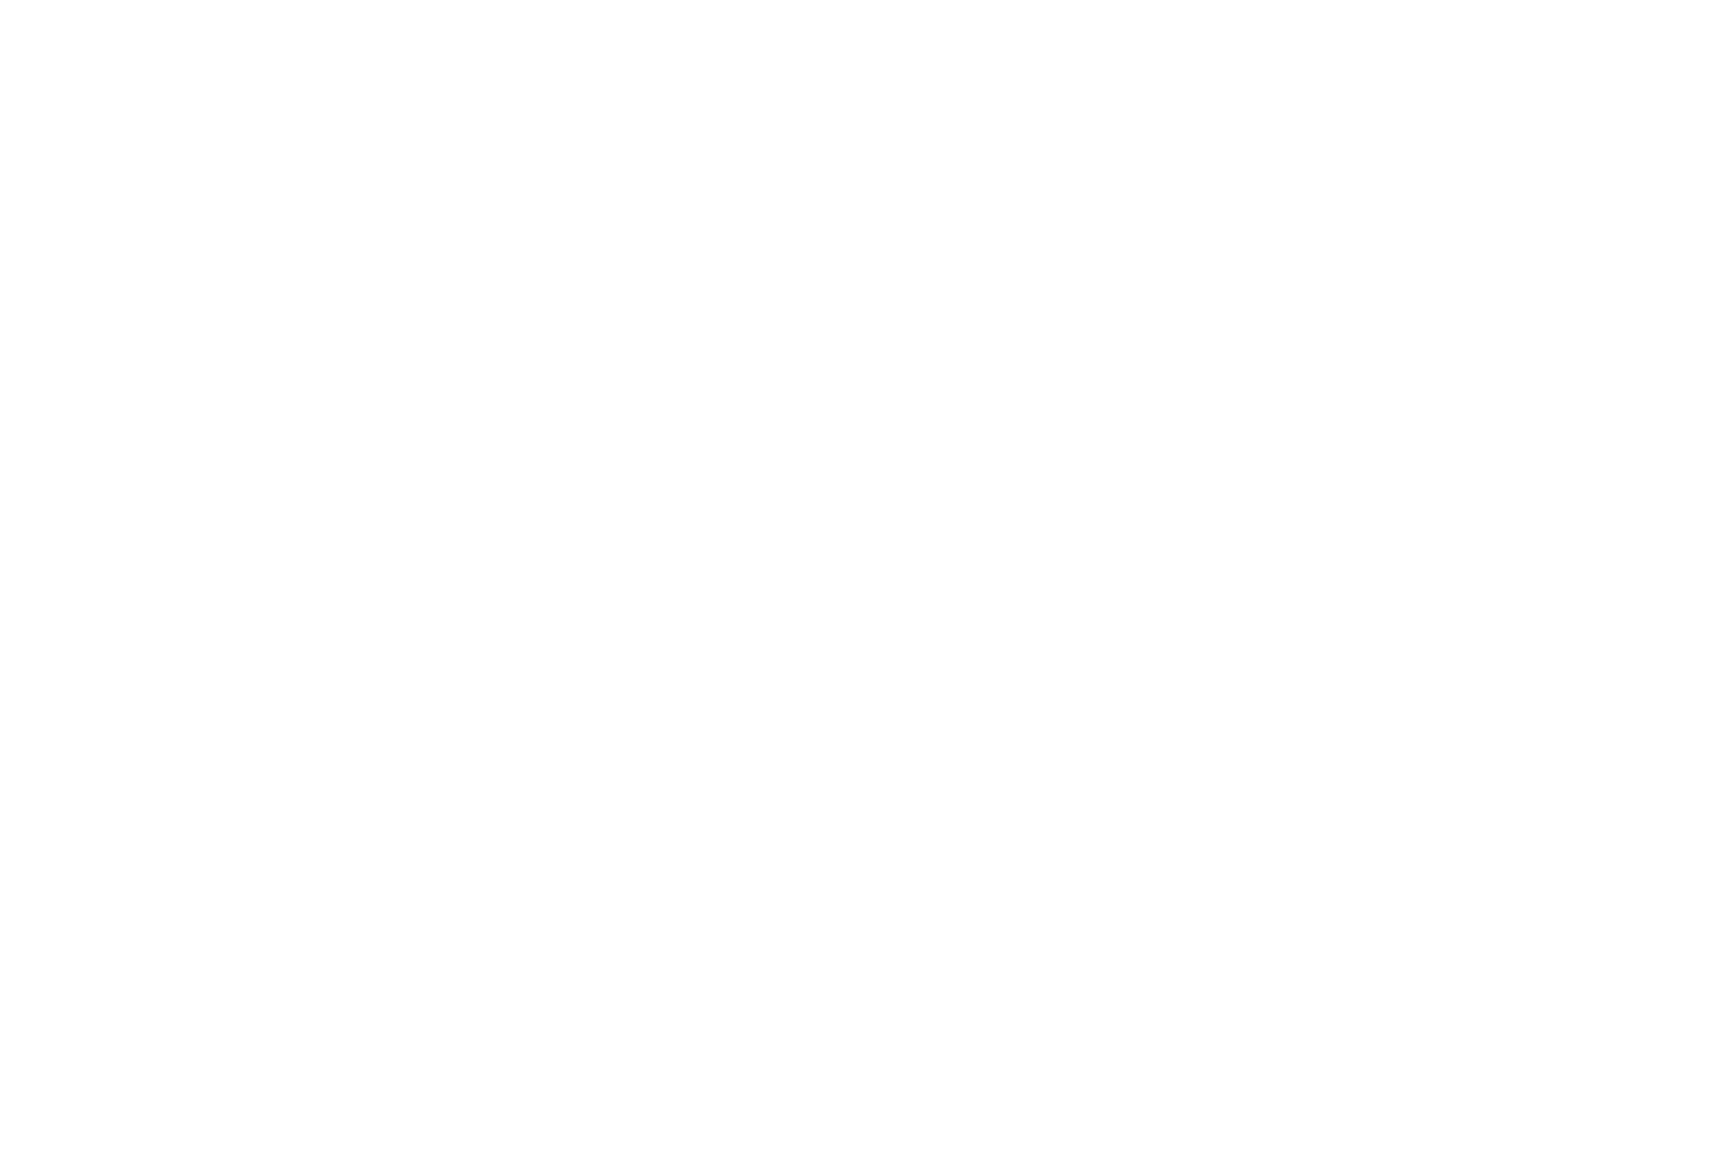 OFFICIAL SELECTION - Tacoma Film Festival - 2023 (3).png